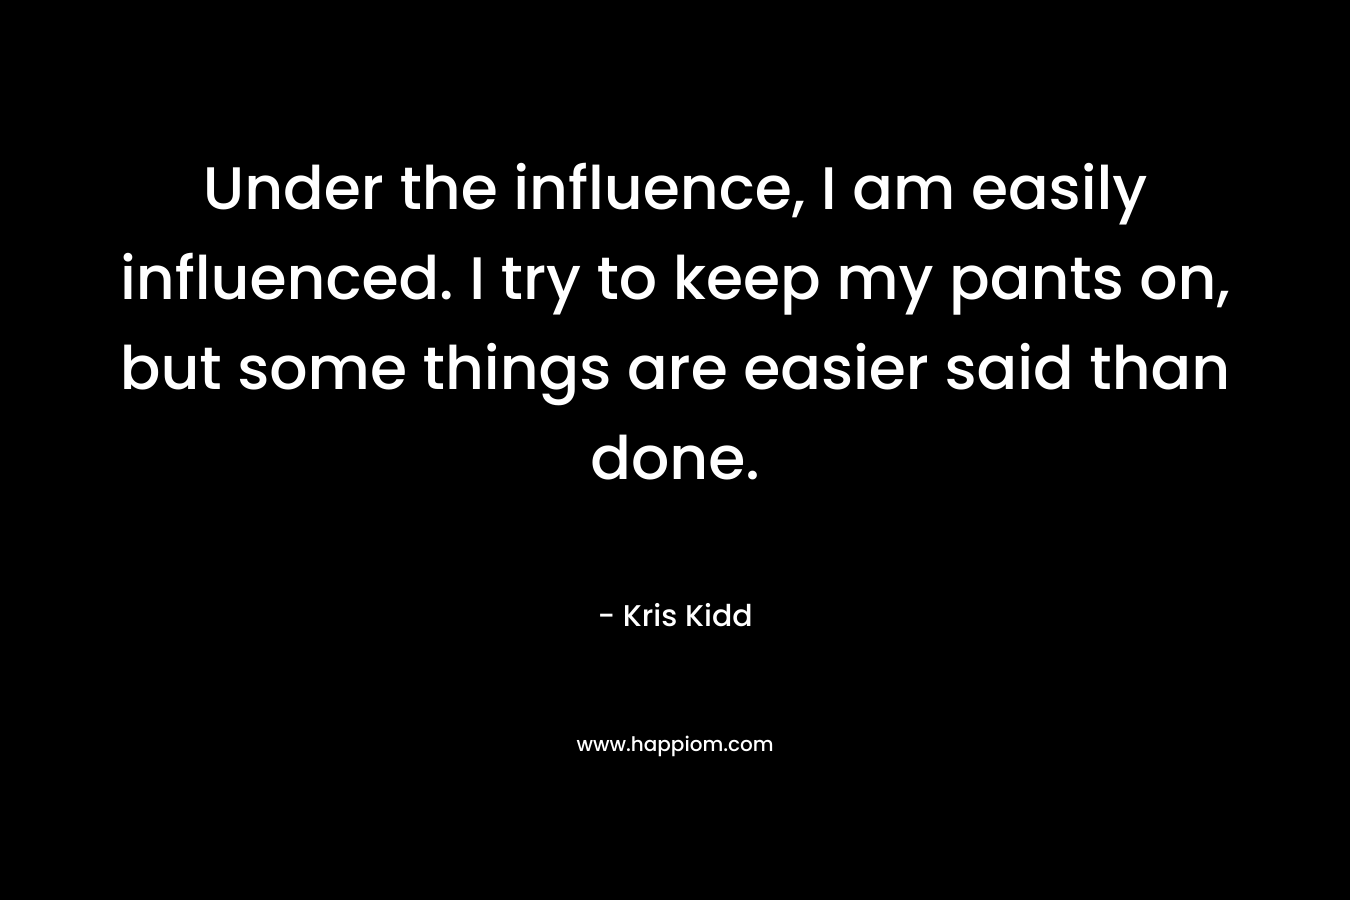 Under the influence, I am easily influenced. I try to keep my pants on, but some things are easier said than done. – Kris Kidd